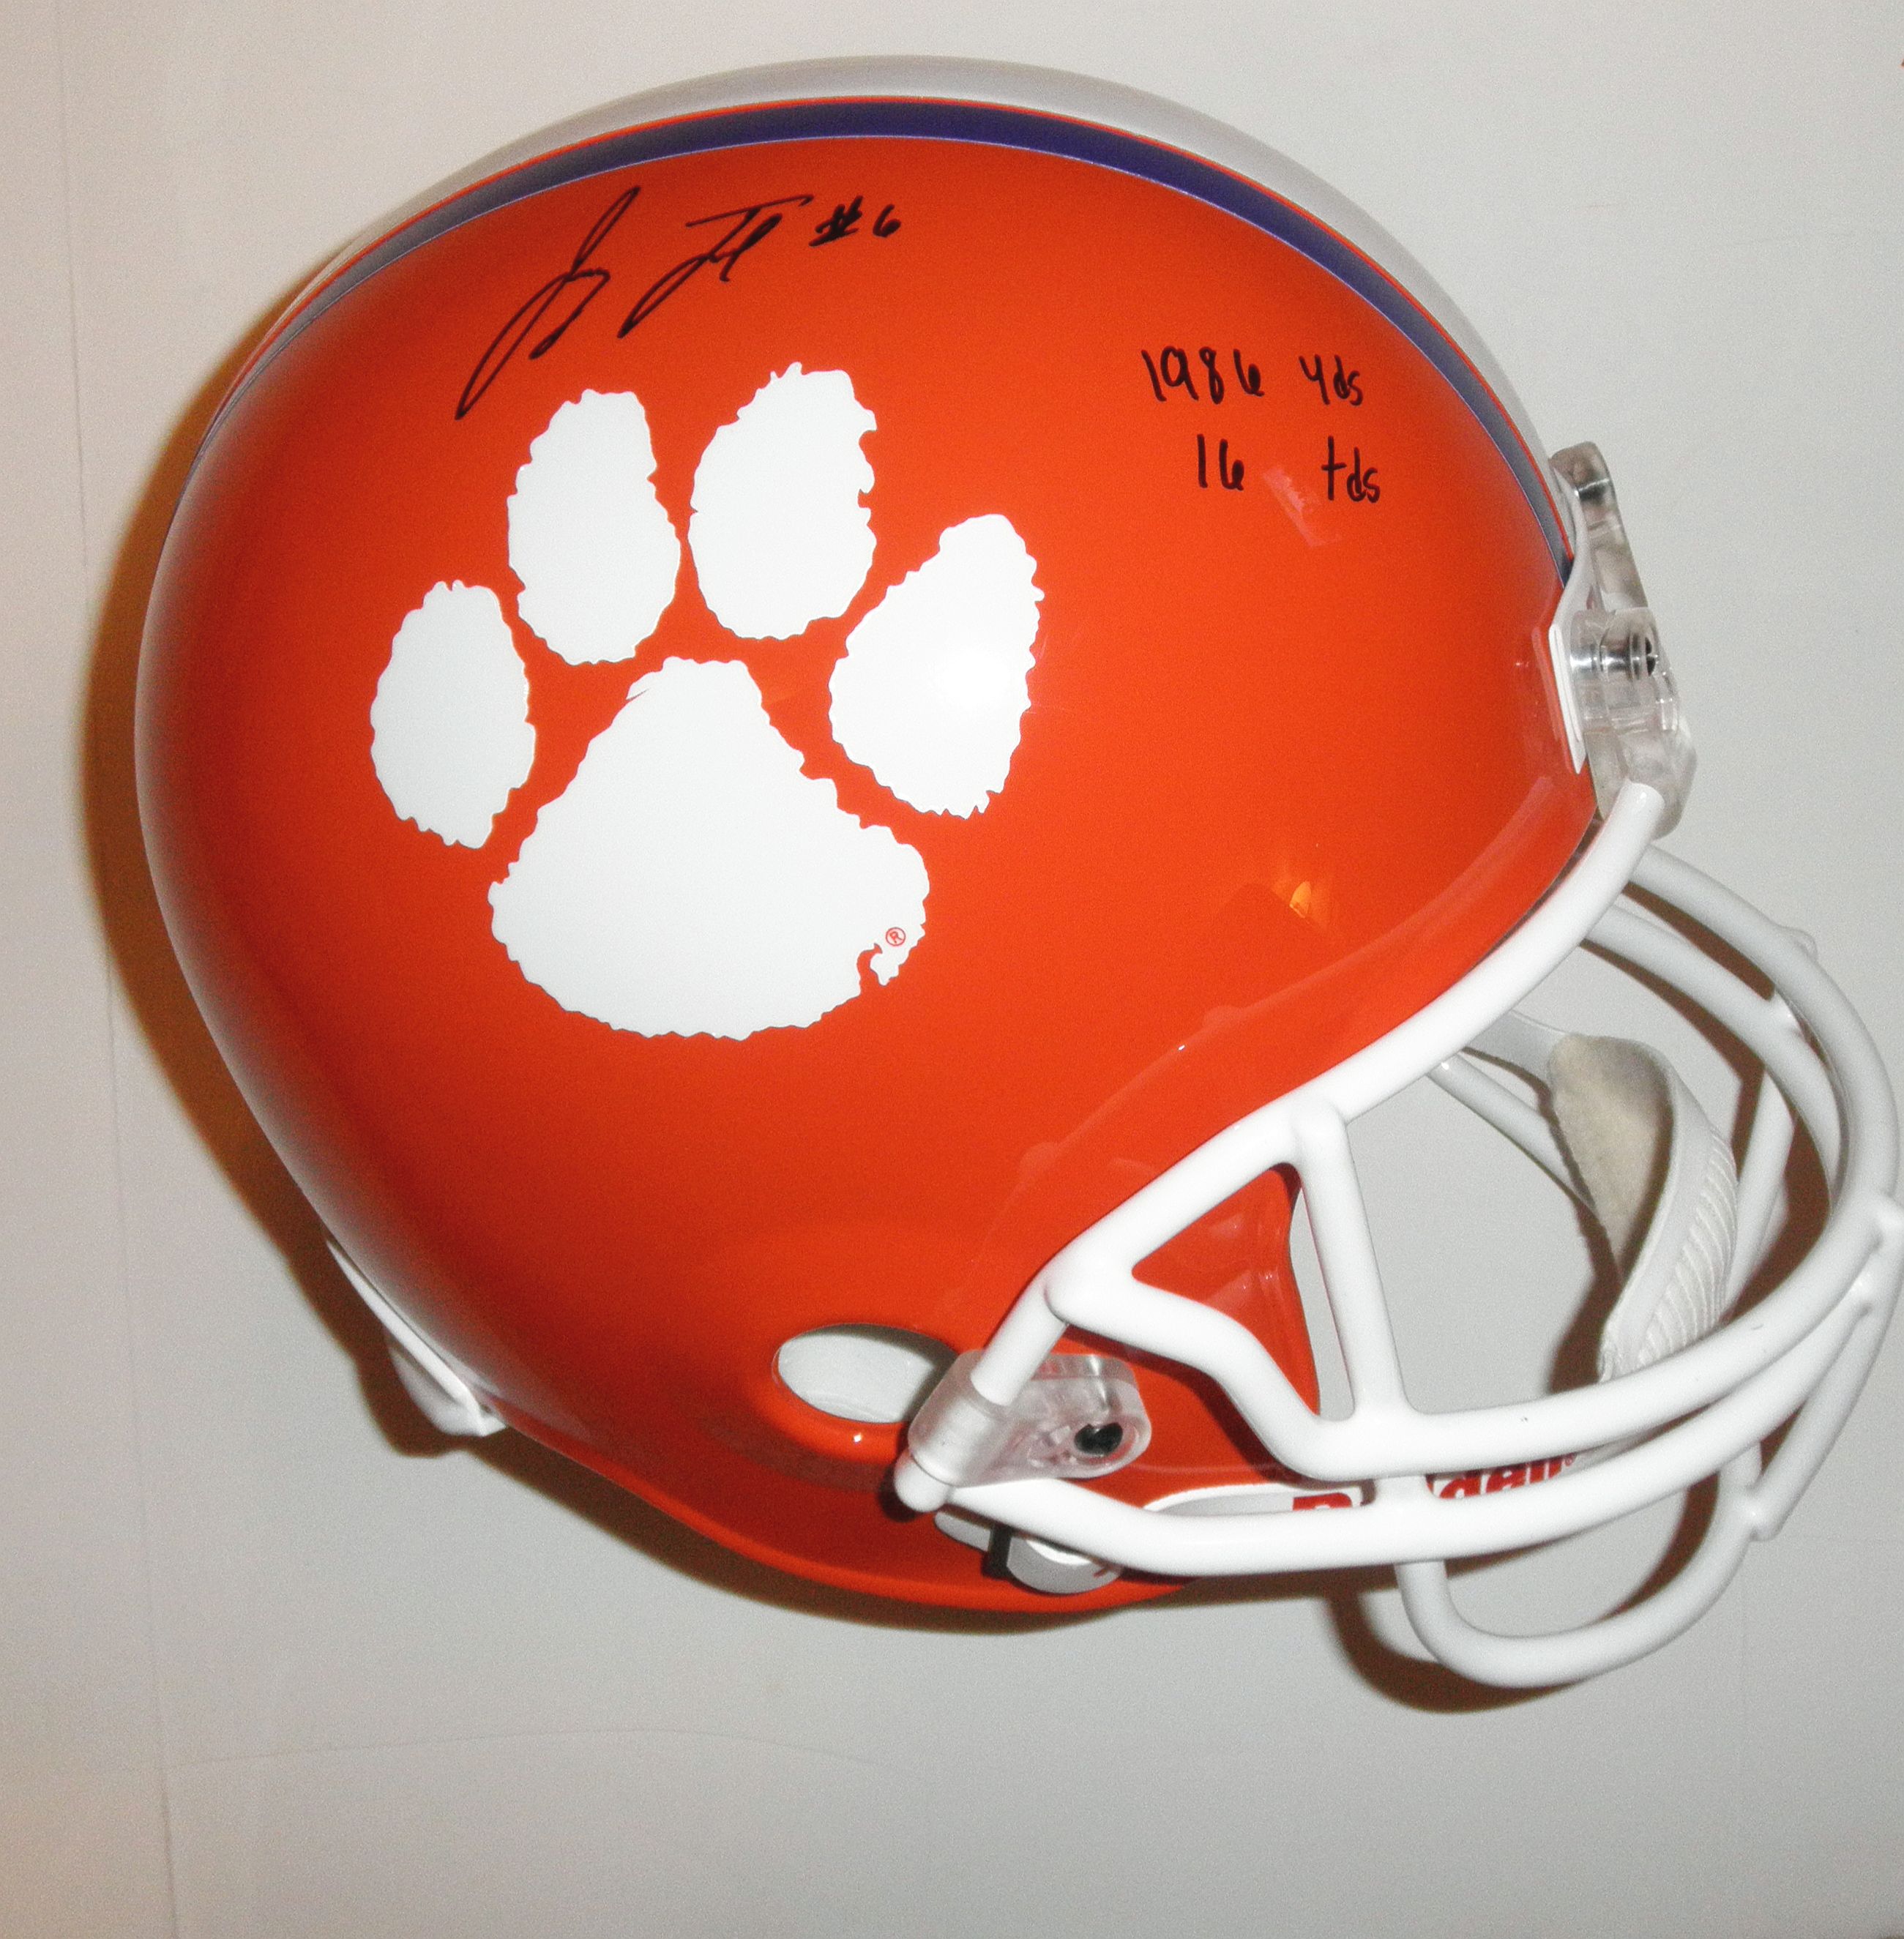 JACOBY FORD AUTOGRAPHED CLEMSON TIGERS HELMET NCAA